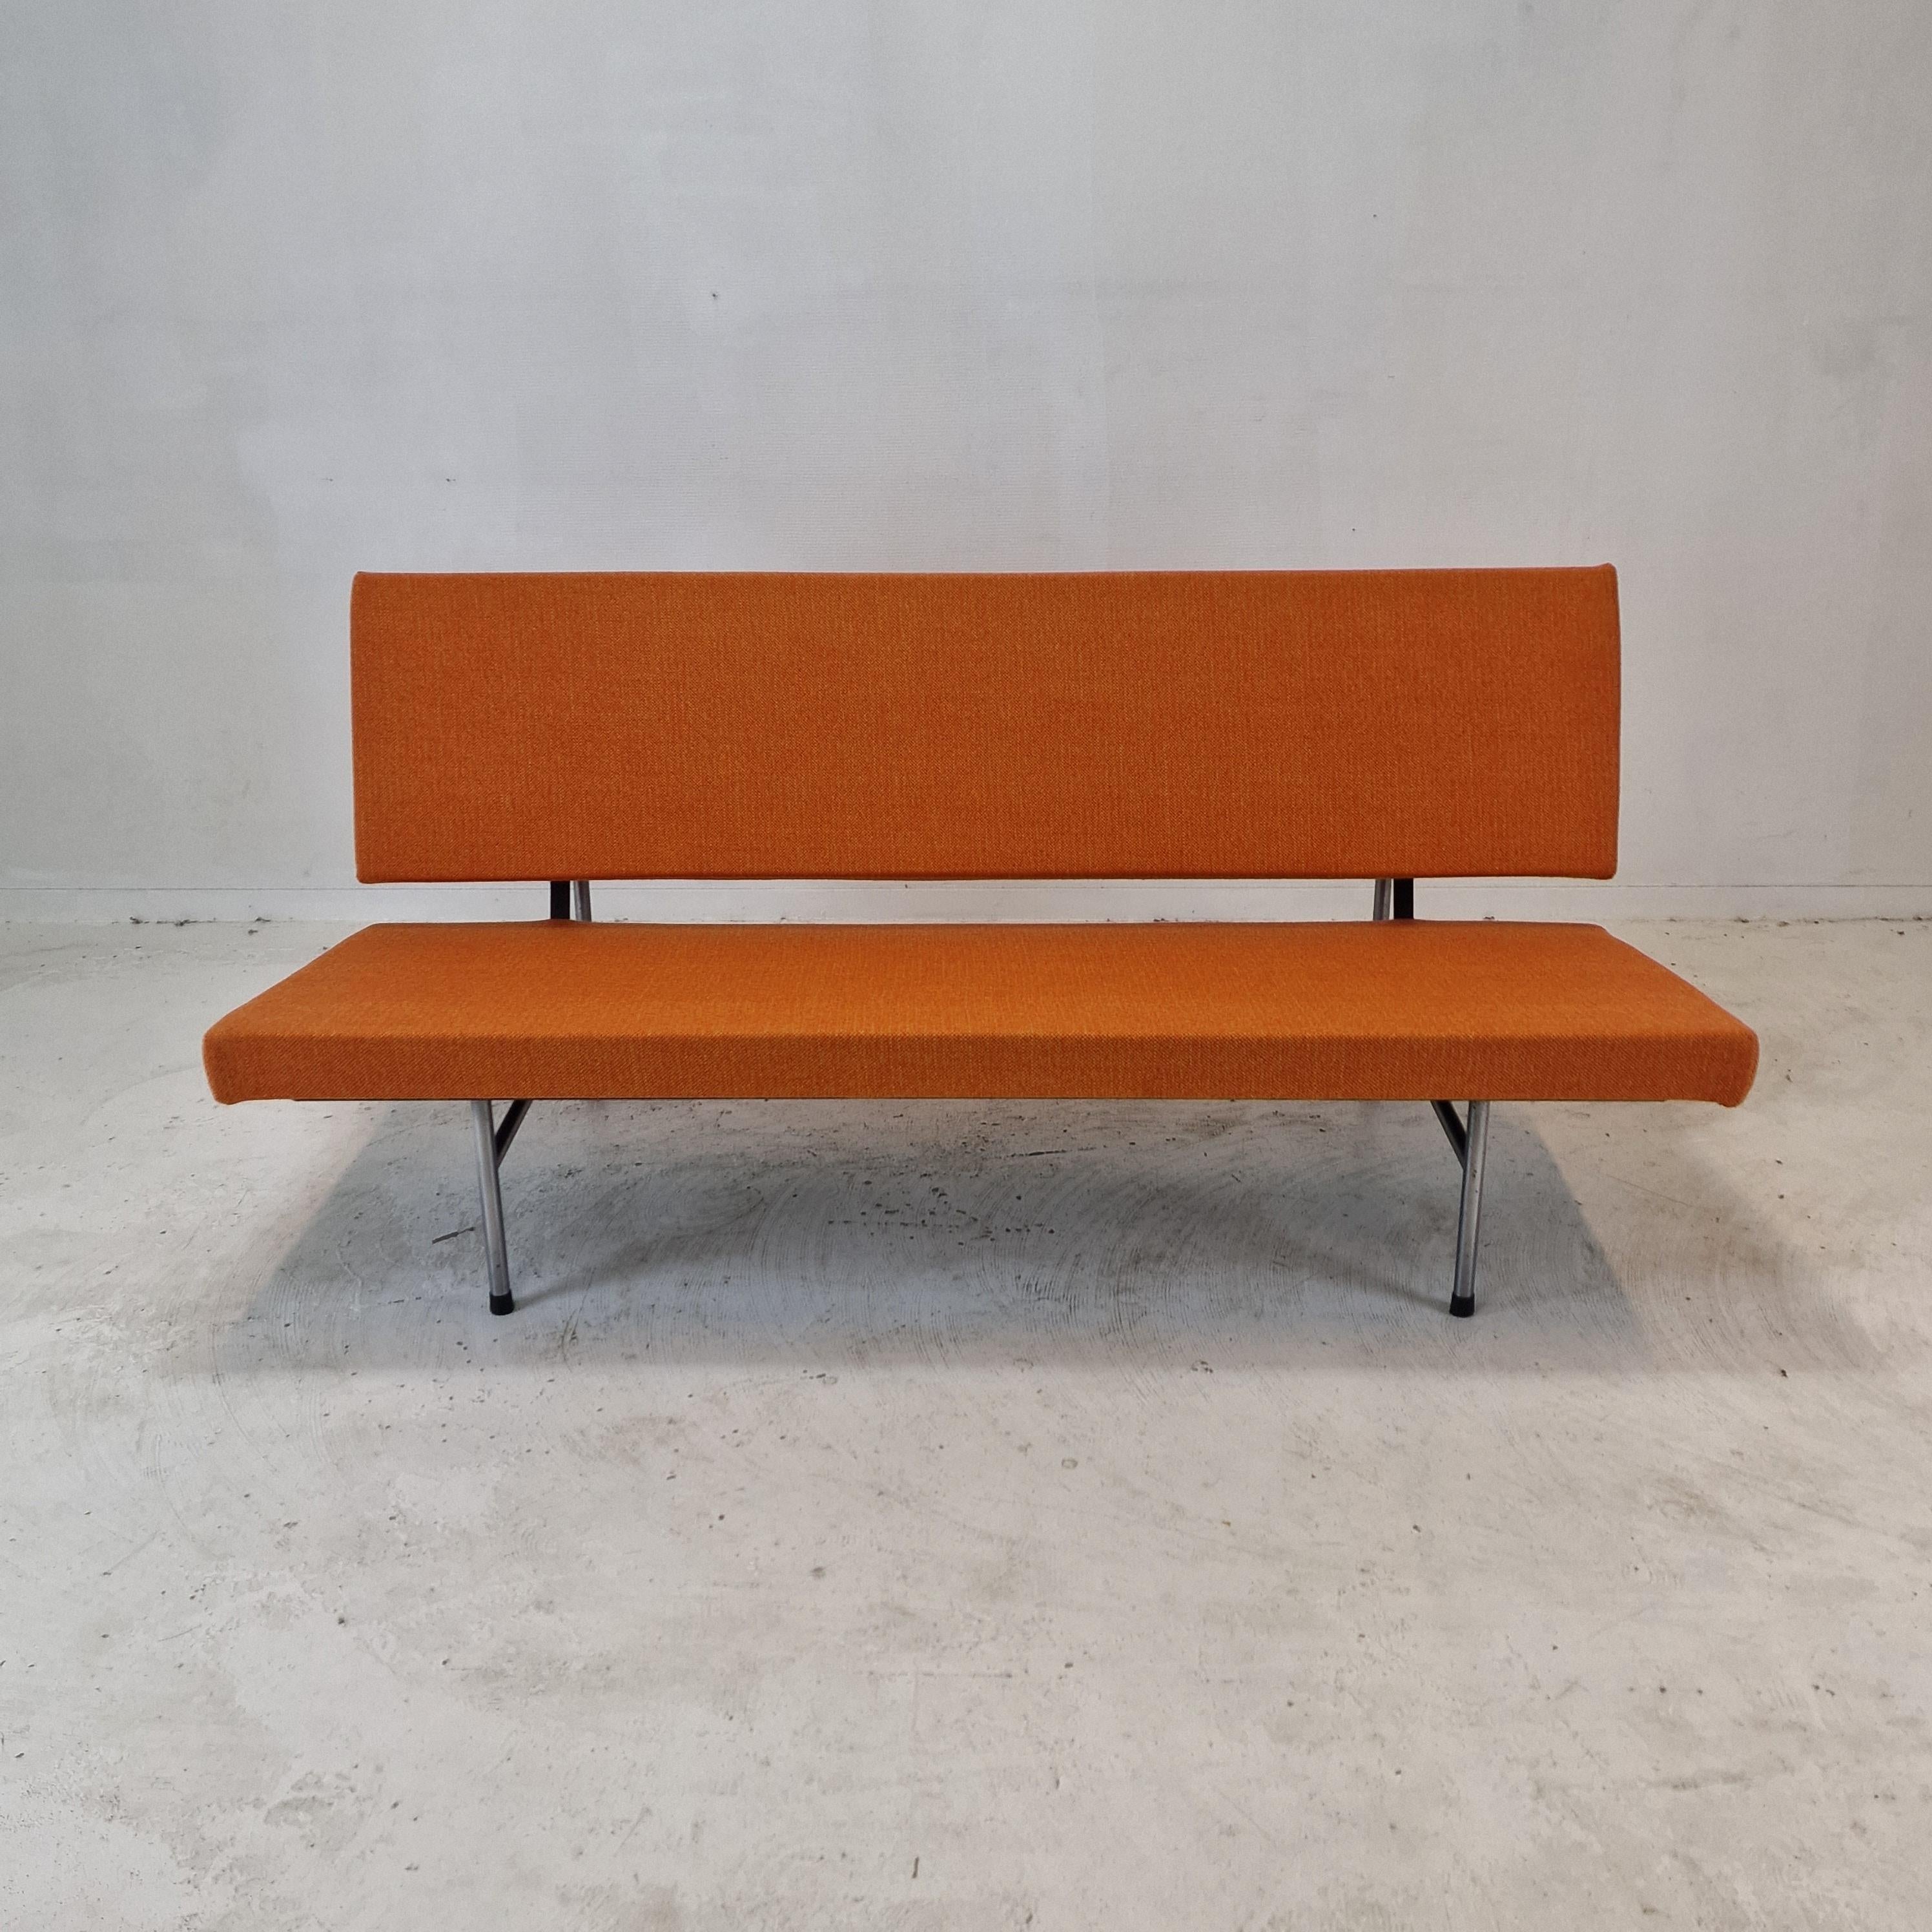 Very nice 2 seat sofa designed by A.R. Cordemeyer. 
Manufactured by Gispen in the 1960s. 

Simple high quality metal structure with maximum comfort. 

Just restored with new foam and new high quality wool fabric, color orange. 

We work with